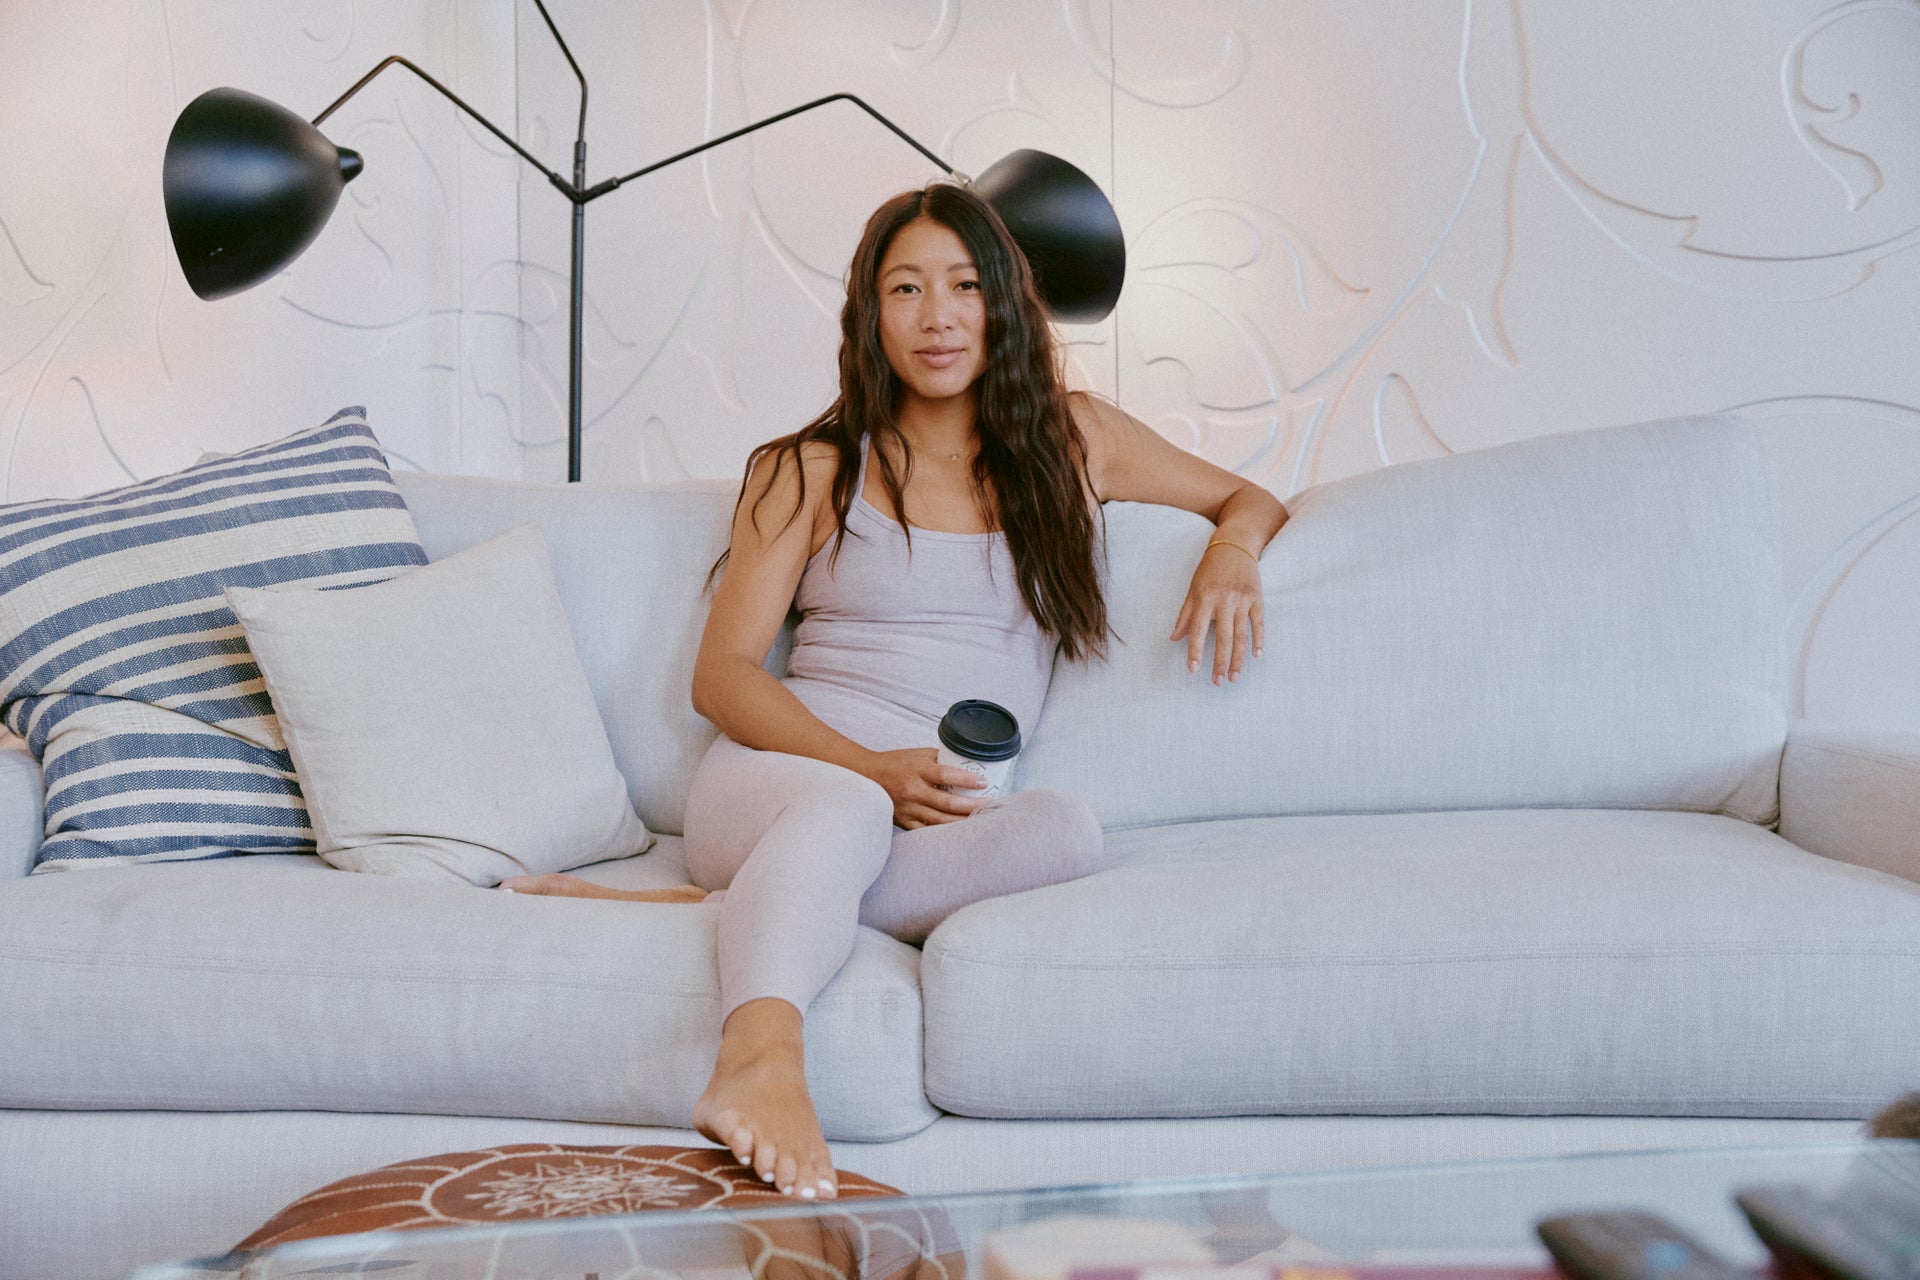 Move in Beyond: Cold Brew and Community with Claire Chan